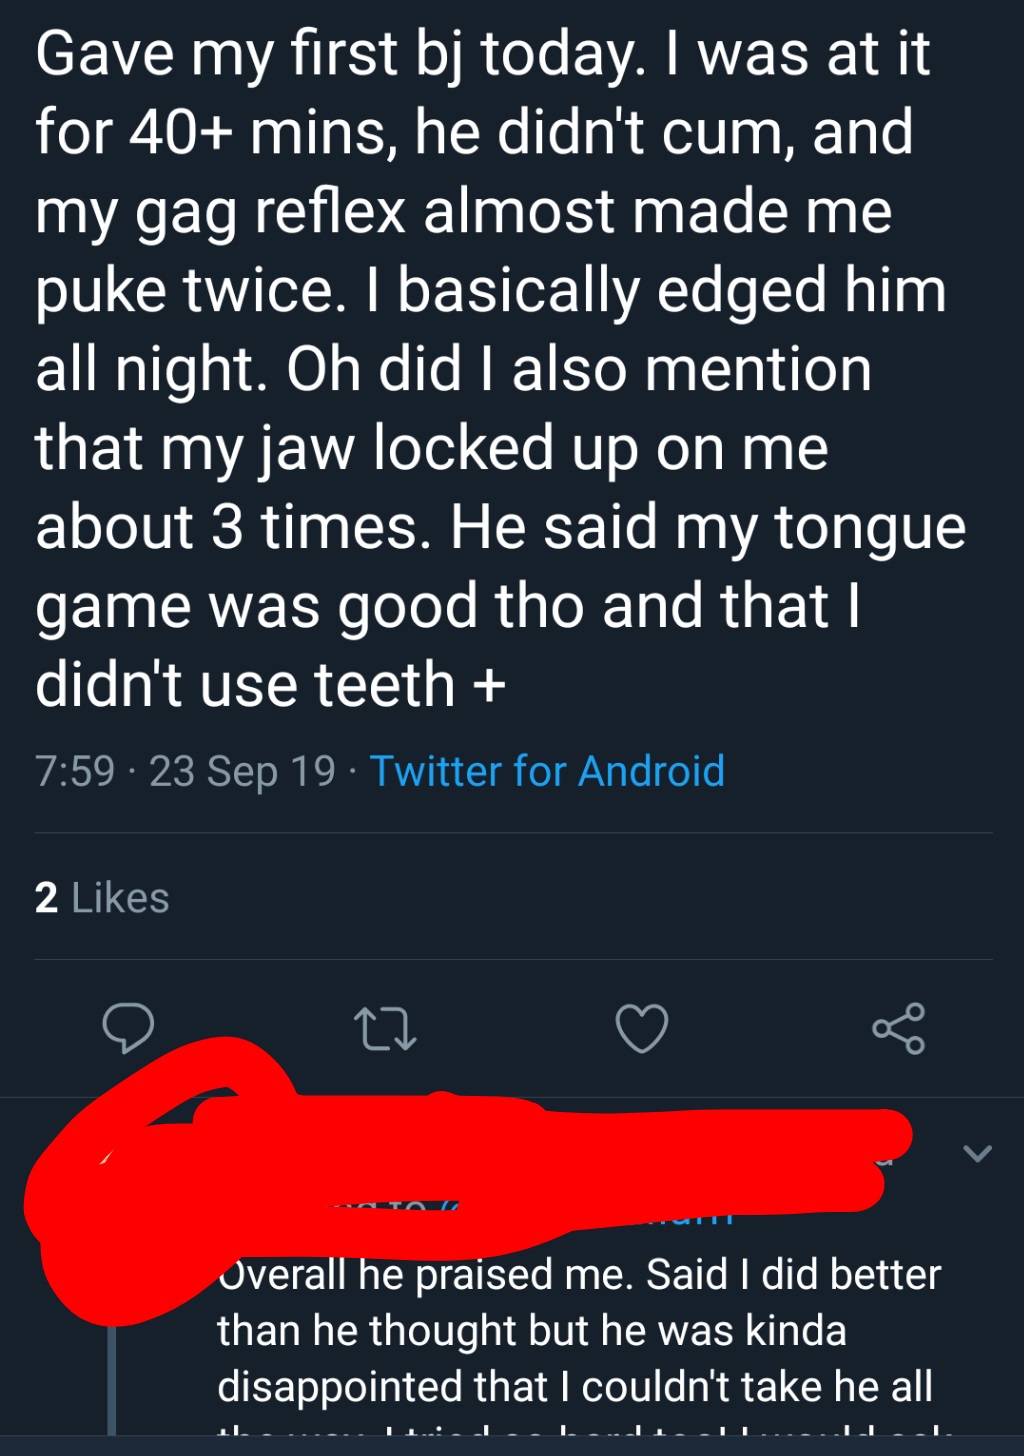 sex memes - I was at it for 40 mins, he didn't cum, and my gag reflex almost made me puke twice. I basically edged him all night. Oh did I also mention that my jaw locked up on me about 3 times. He said my tongue game